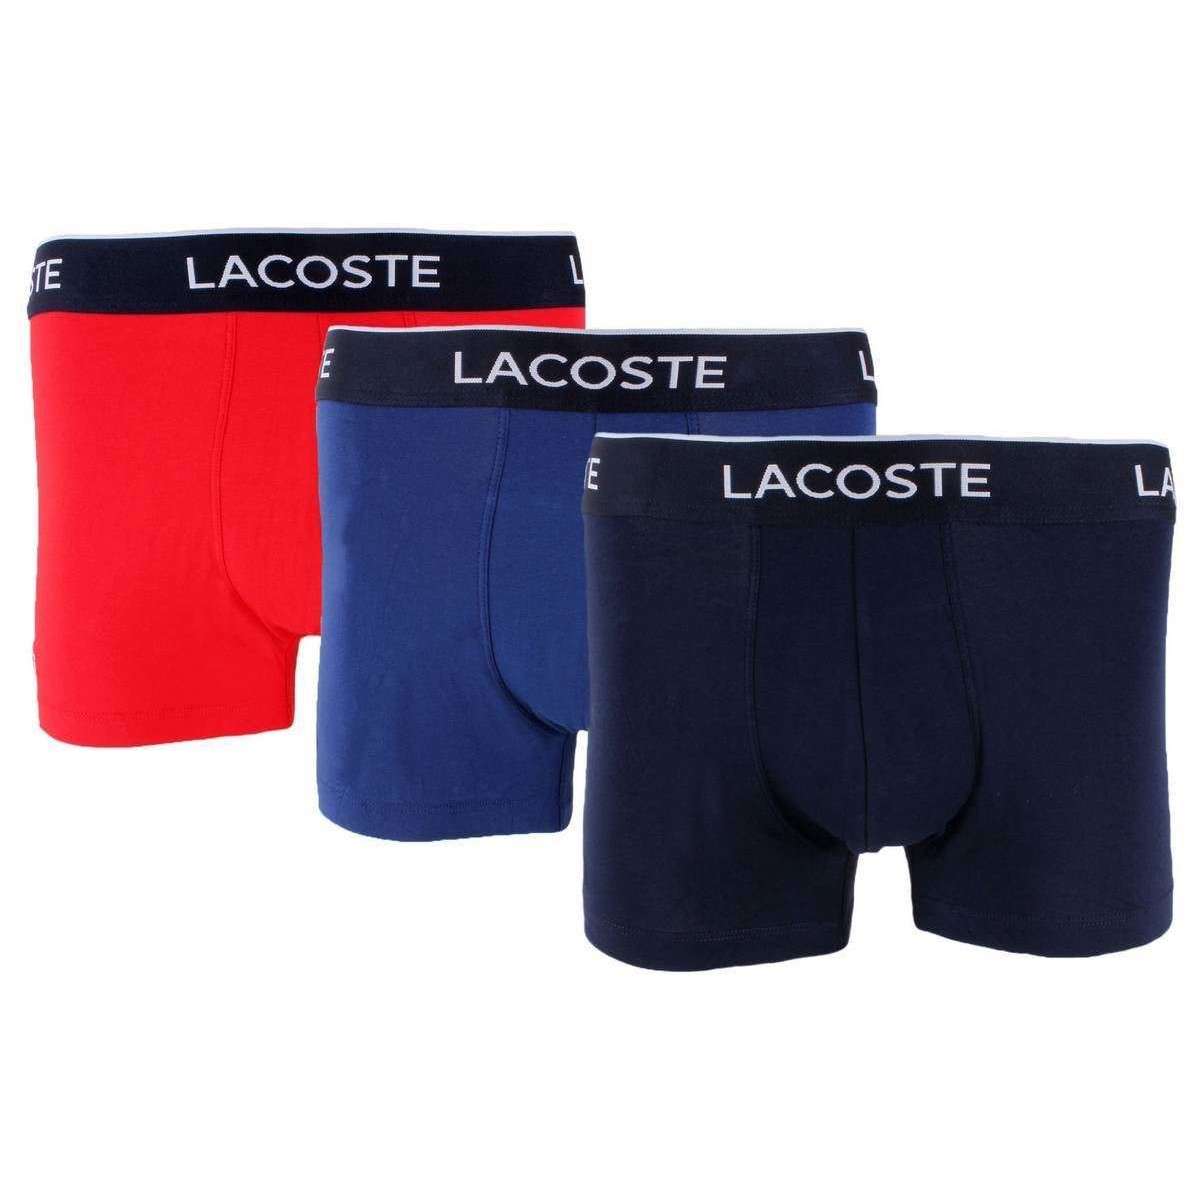 Lacoste Casual 3 Pack Trunks - Red/Navy/Black